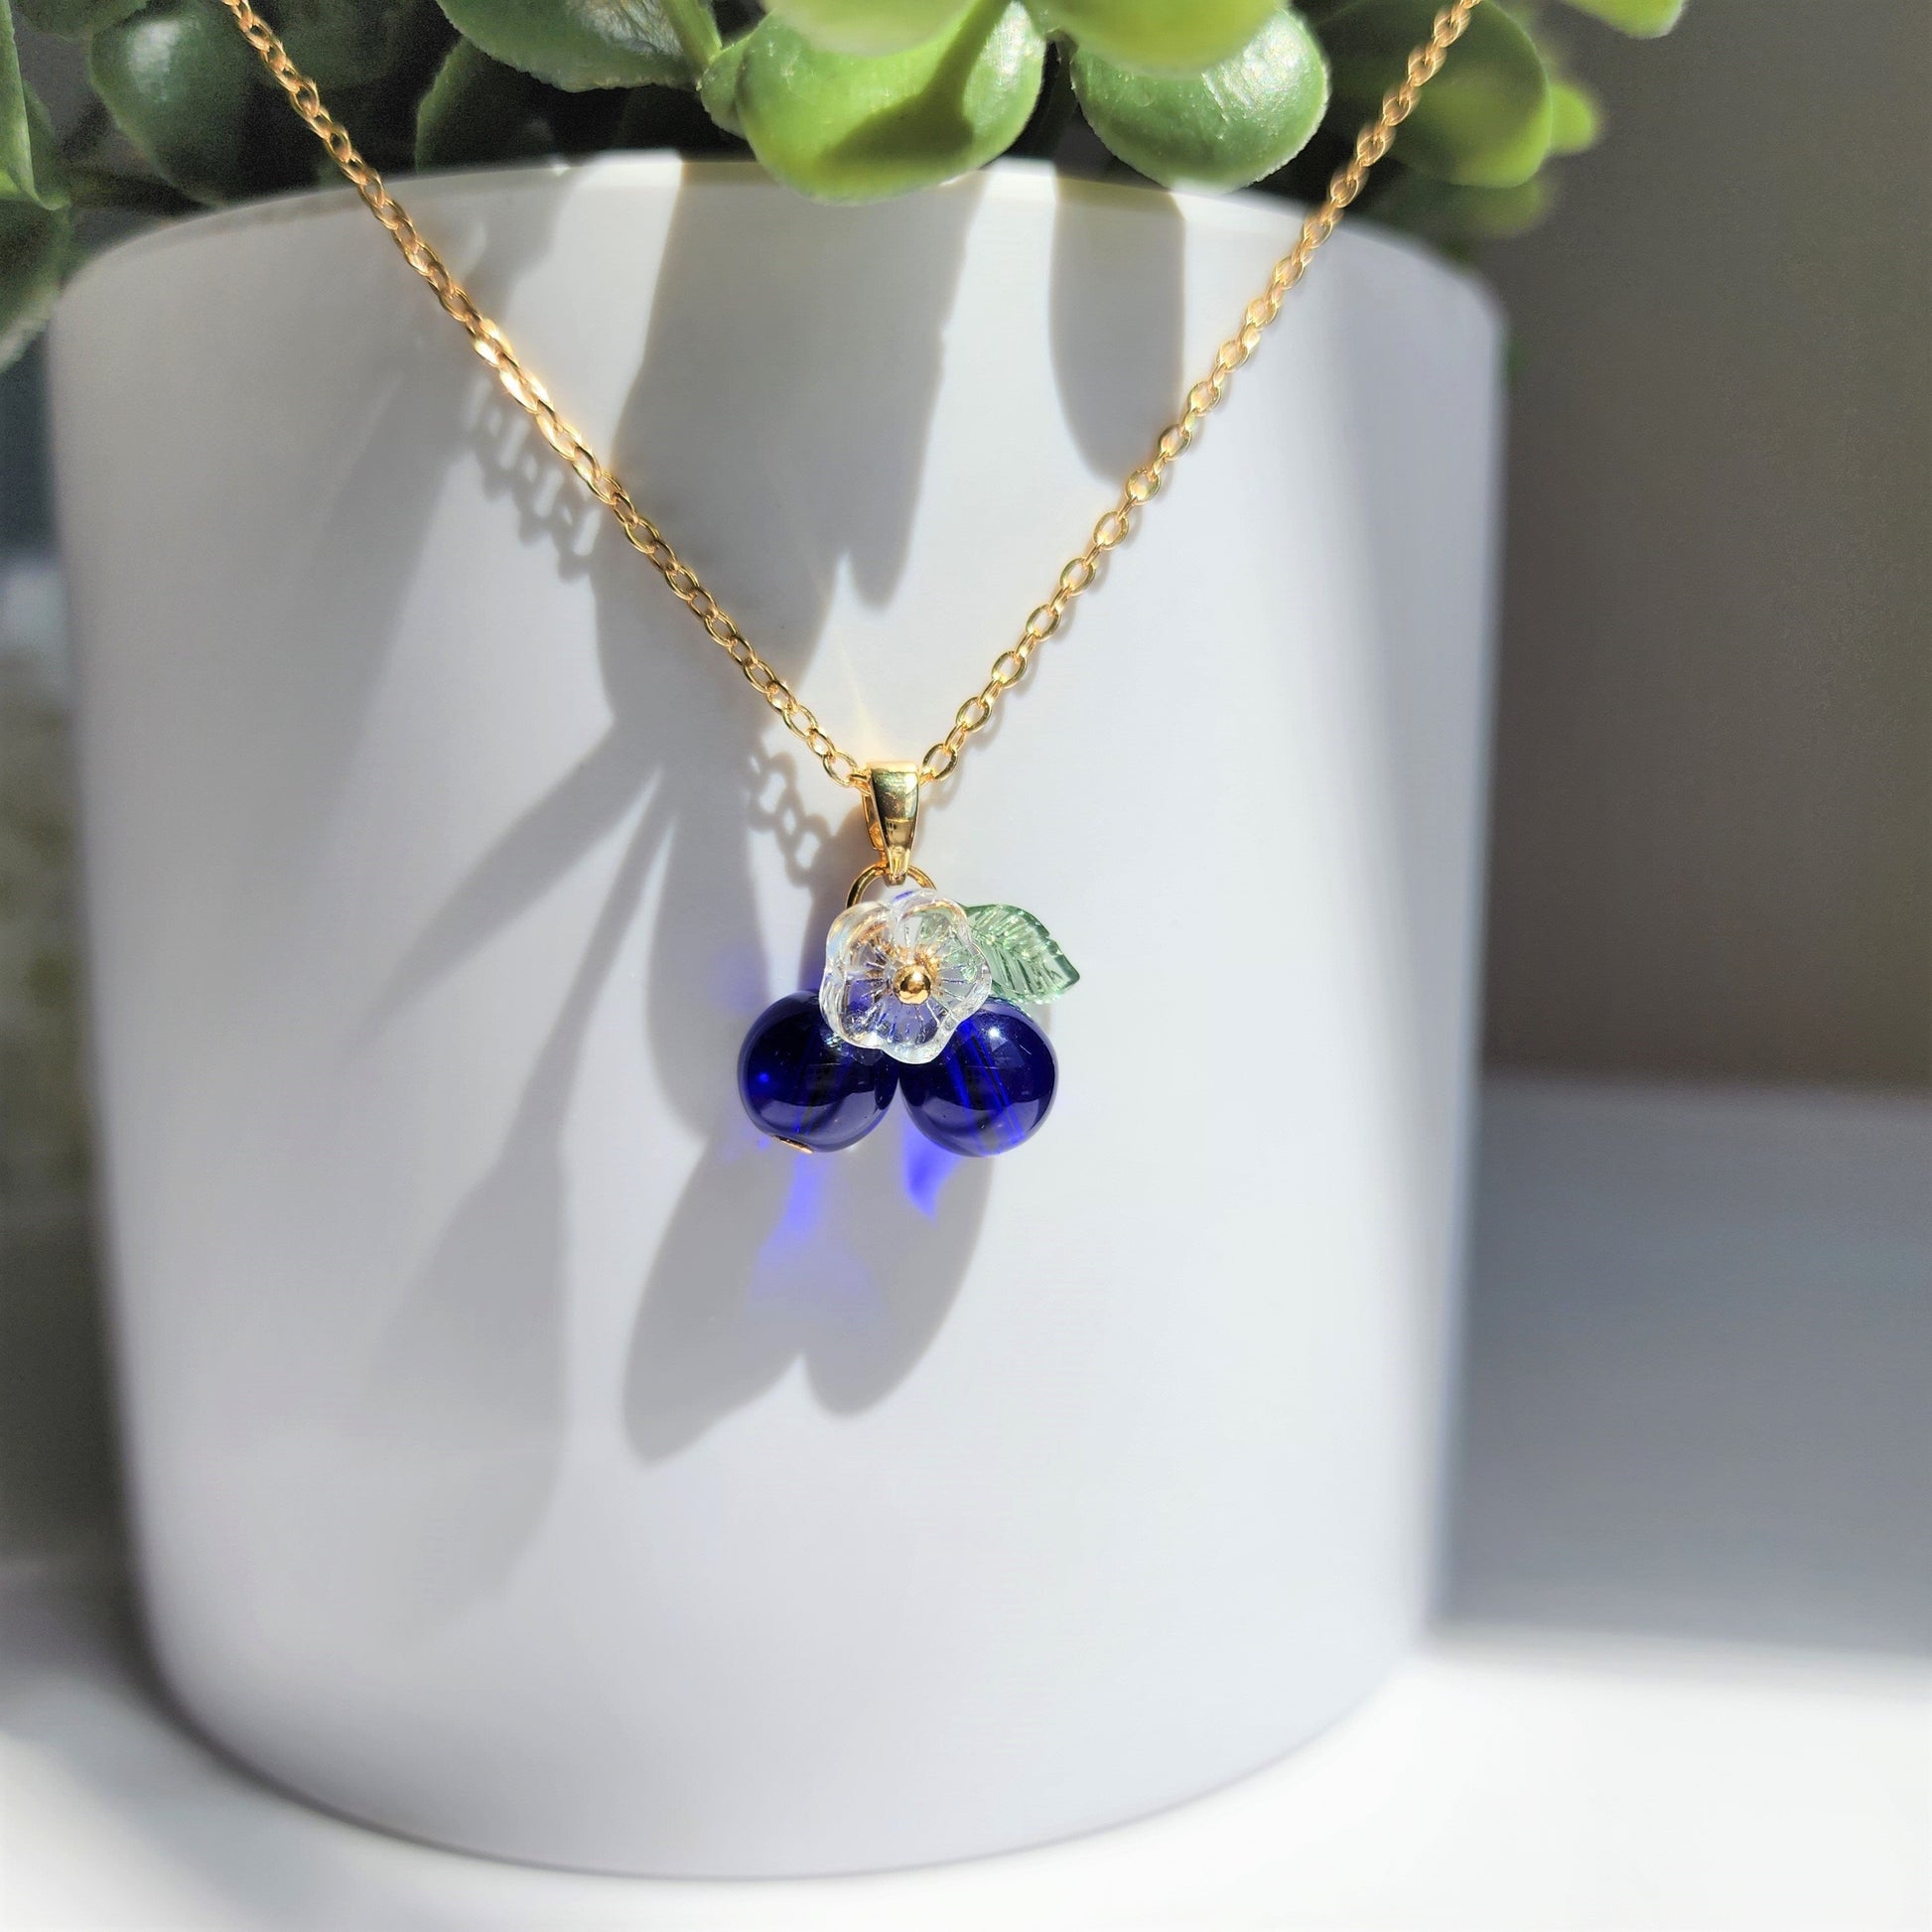 Blueberry necklace, Glass blueberry with flower necklace, Fruit necklace, Gift for her